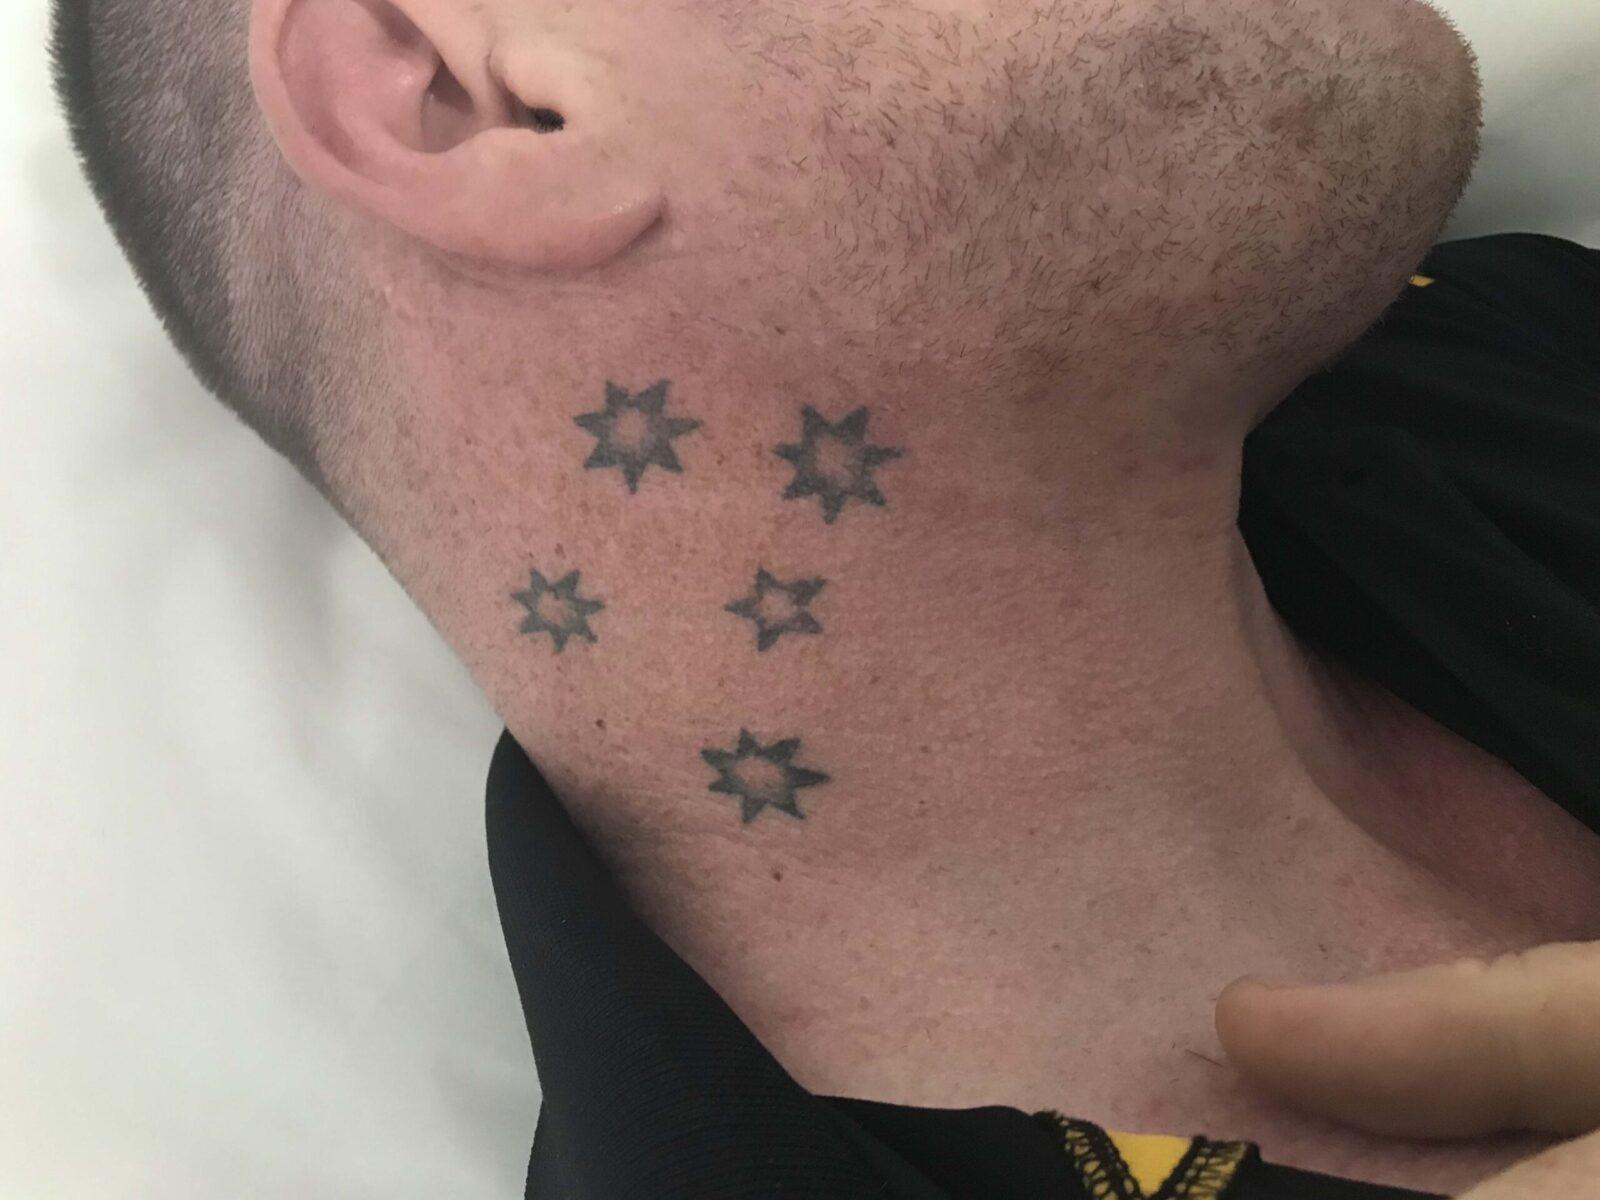 Tattoo - Before Image | Tattoo Removal Adelaide